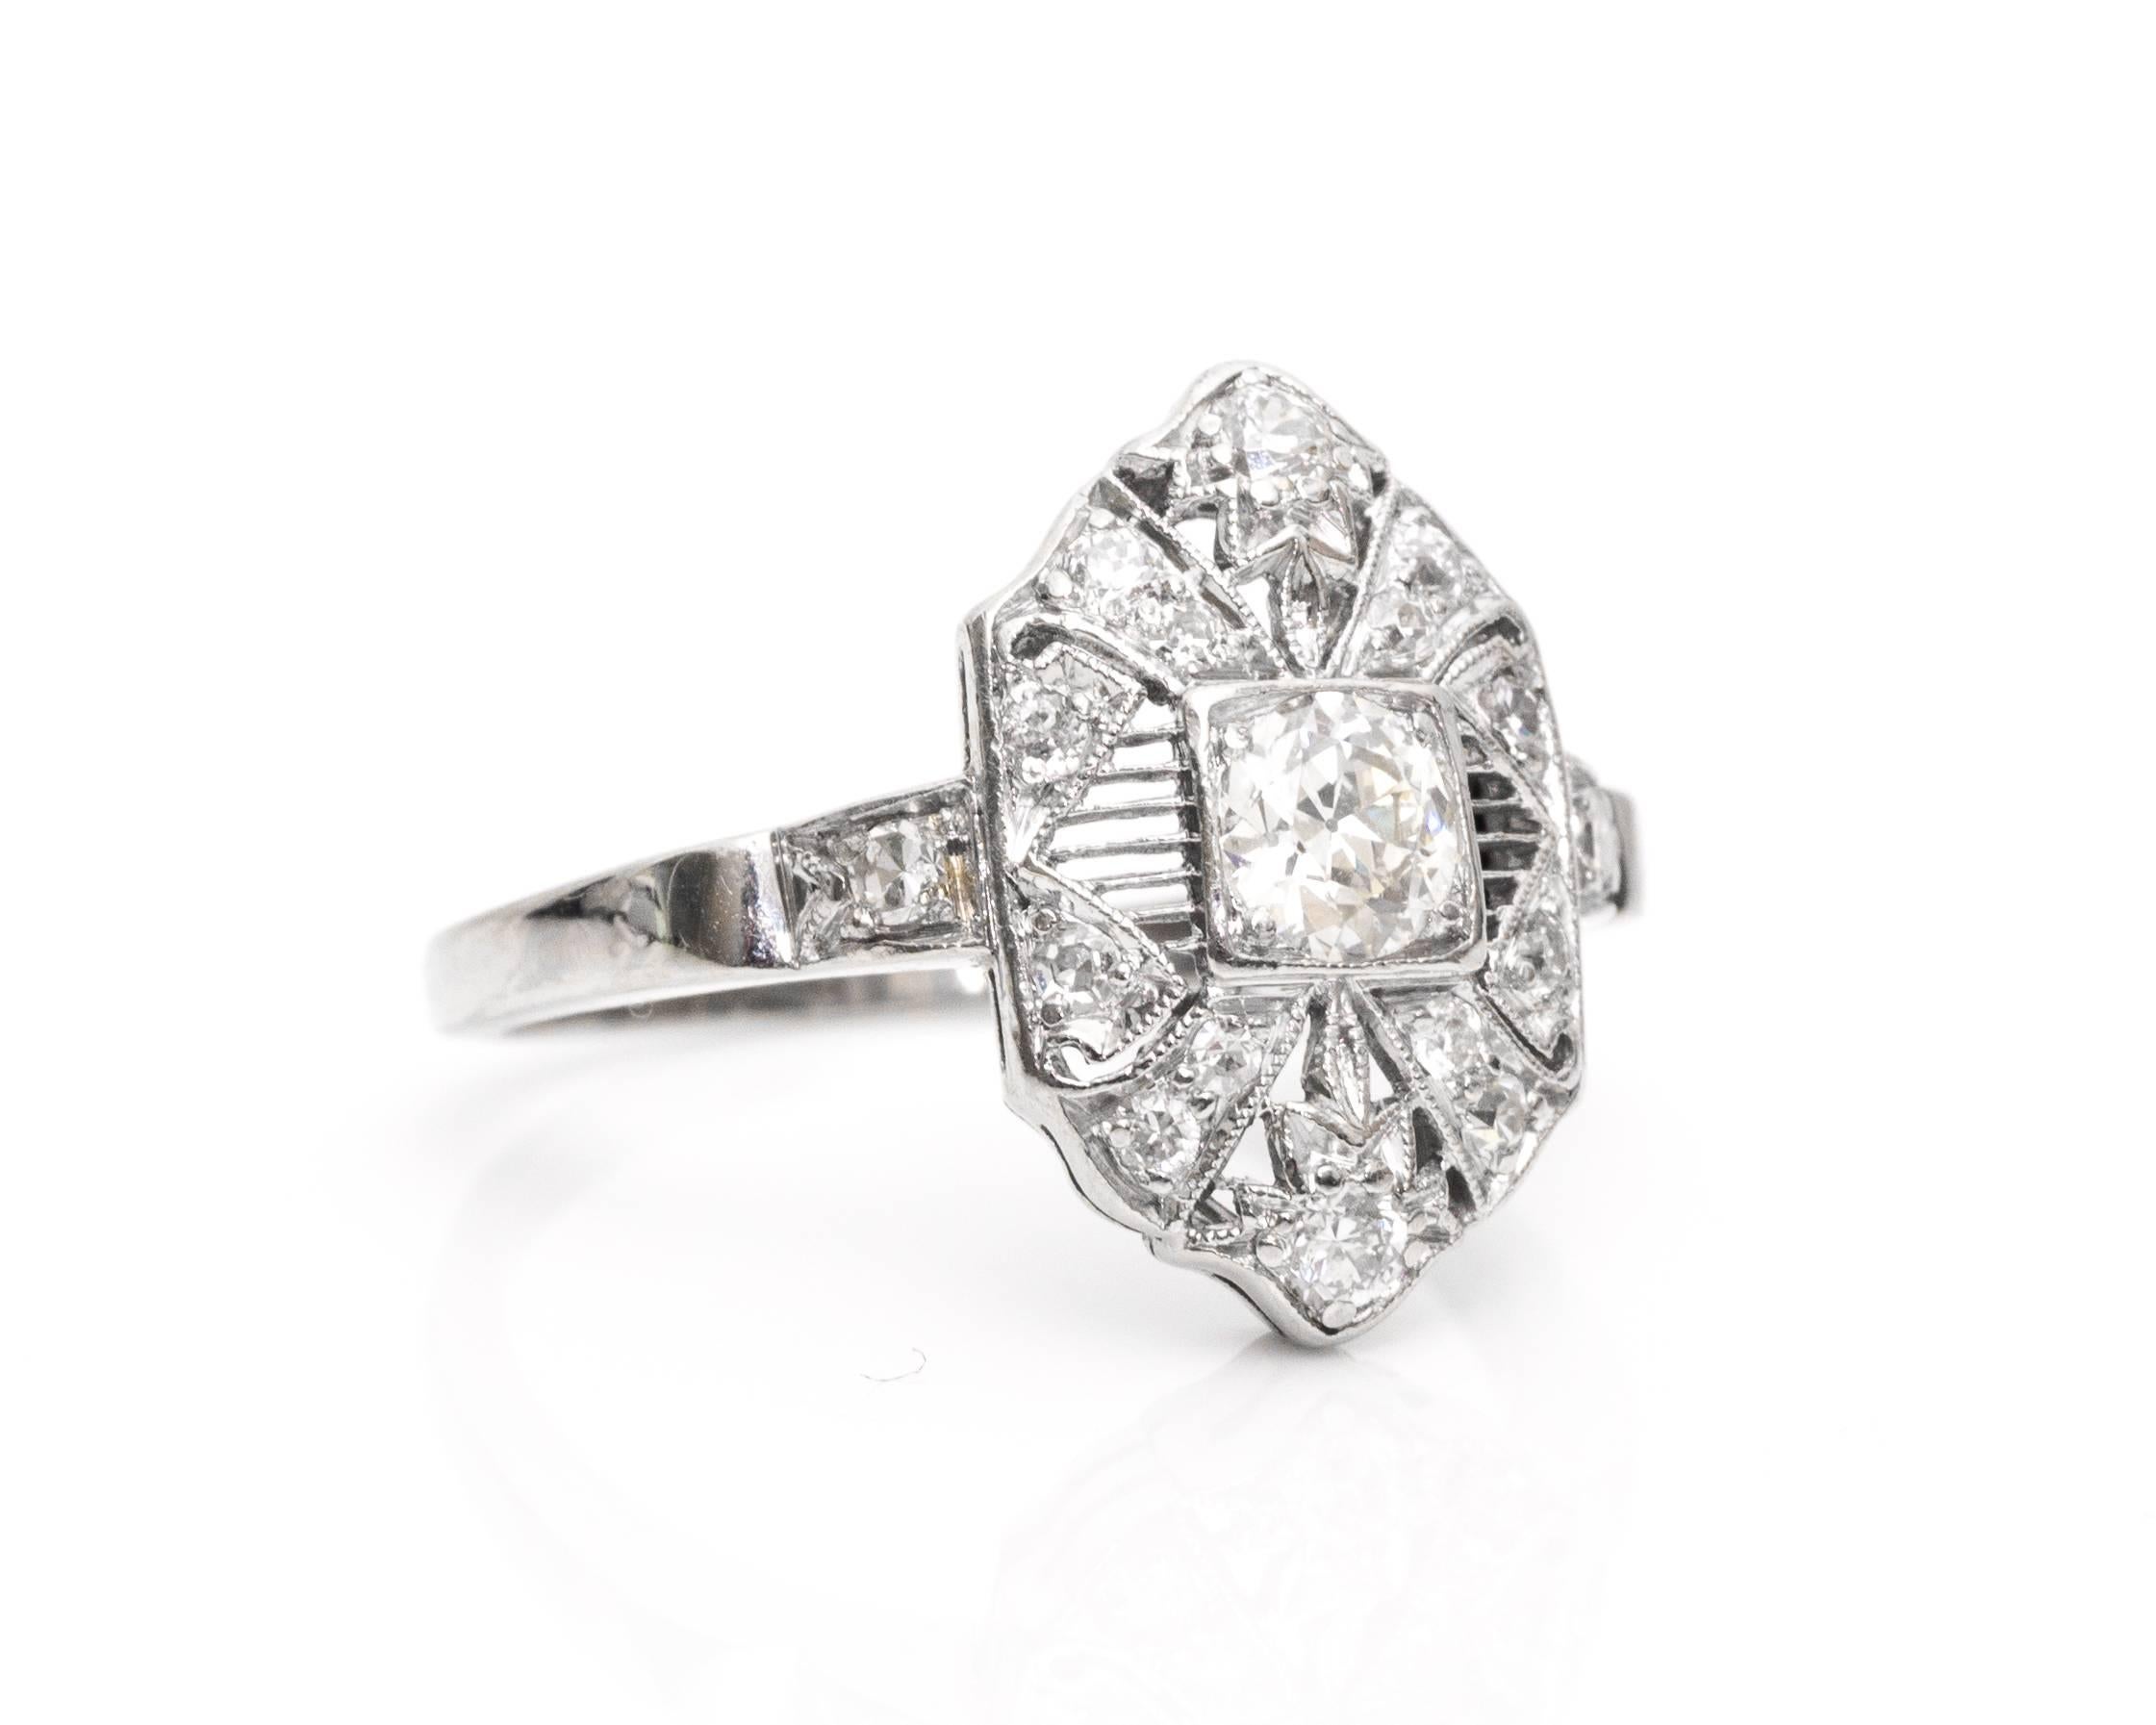 1920s Art Deco .45 Carat Old European Diamond Platinum Shield Ring
Fits Ring Size 5
Platinum Crafted Dainty Shield Ring 
Plenty of Sparkle and Ultra Shine from Diamonds
Mix of Old European and Single Cut Diamonds
Total Carat Weight 0.45 carats

All